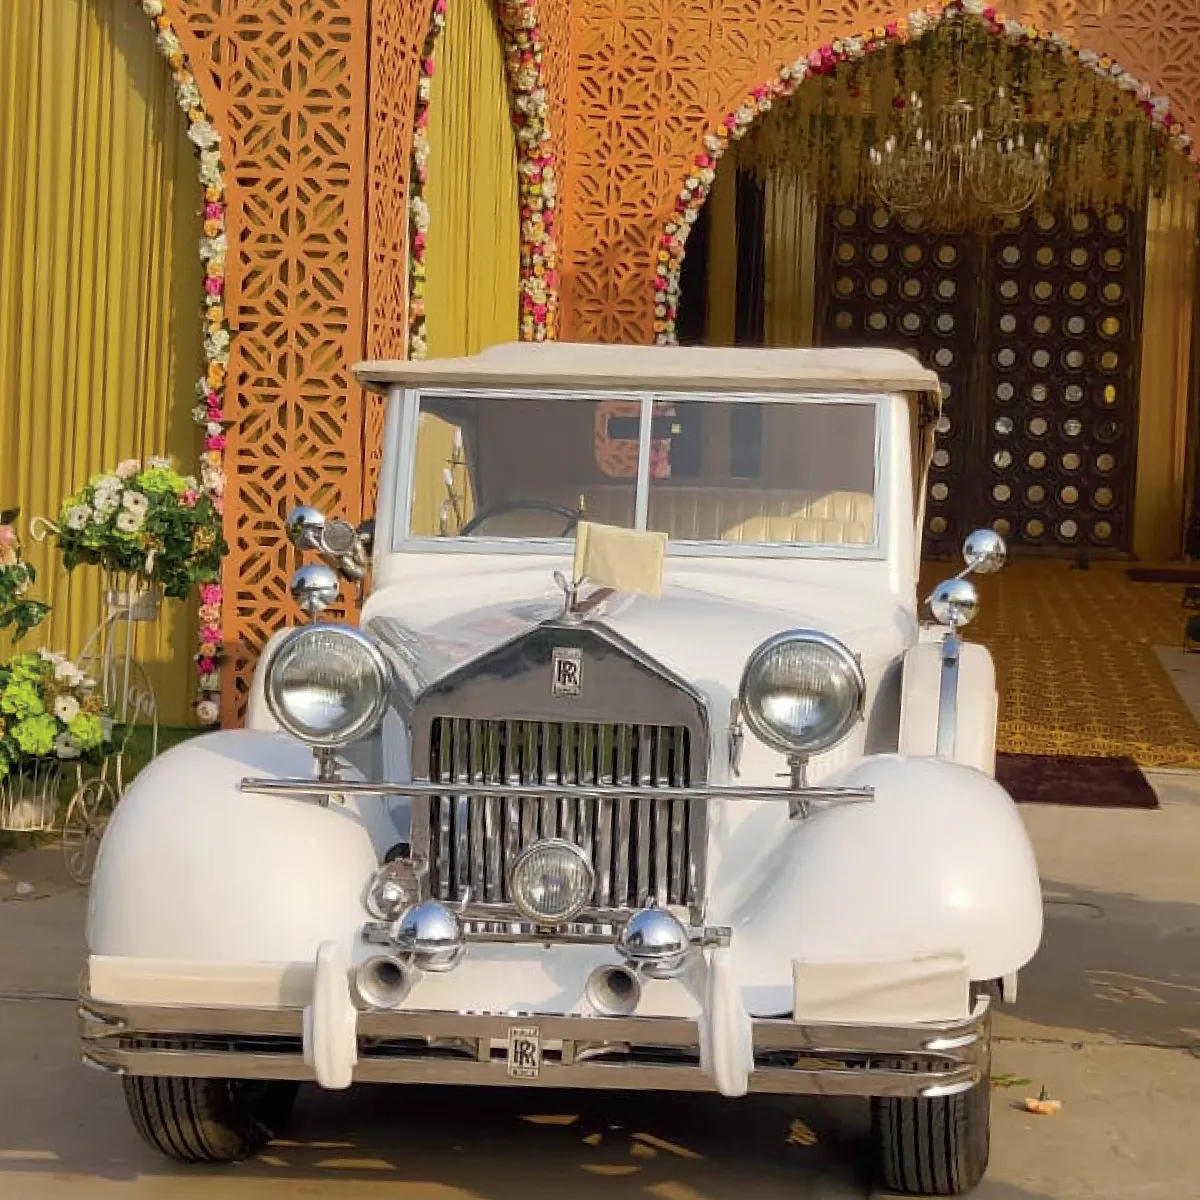 Hire Vintage Cars for Weddings